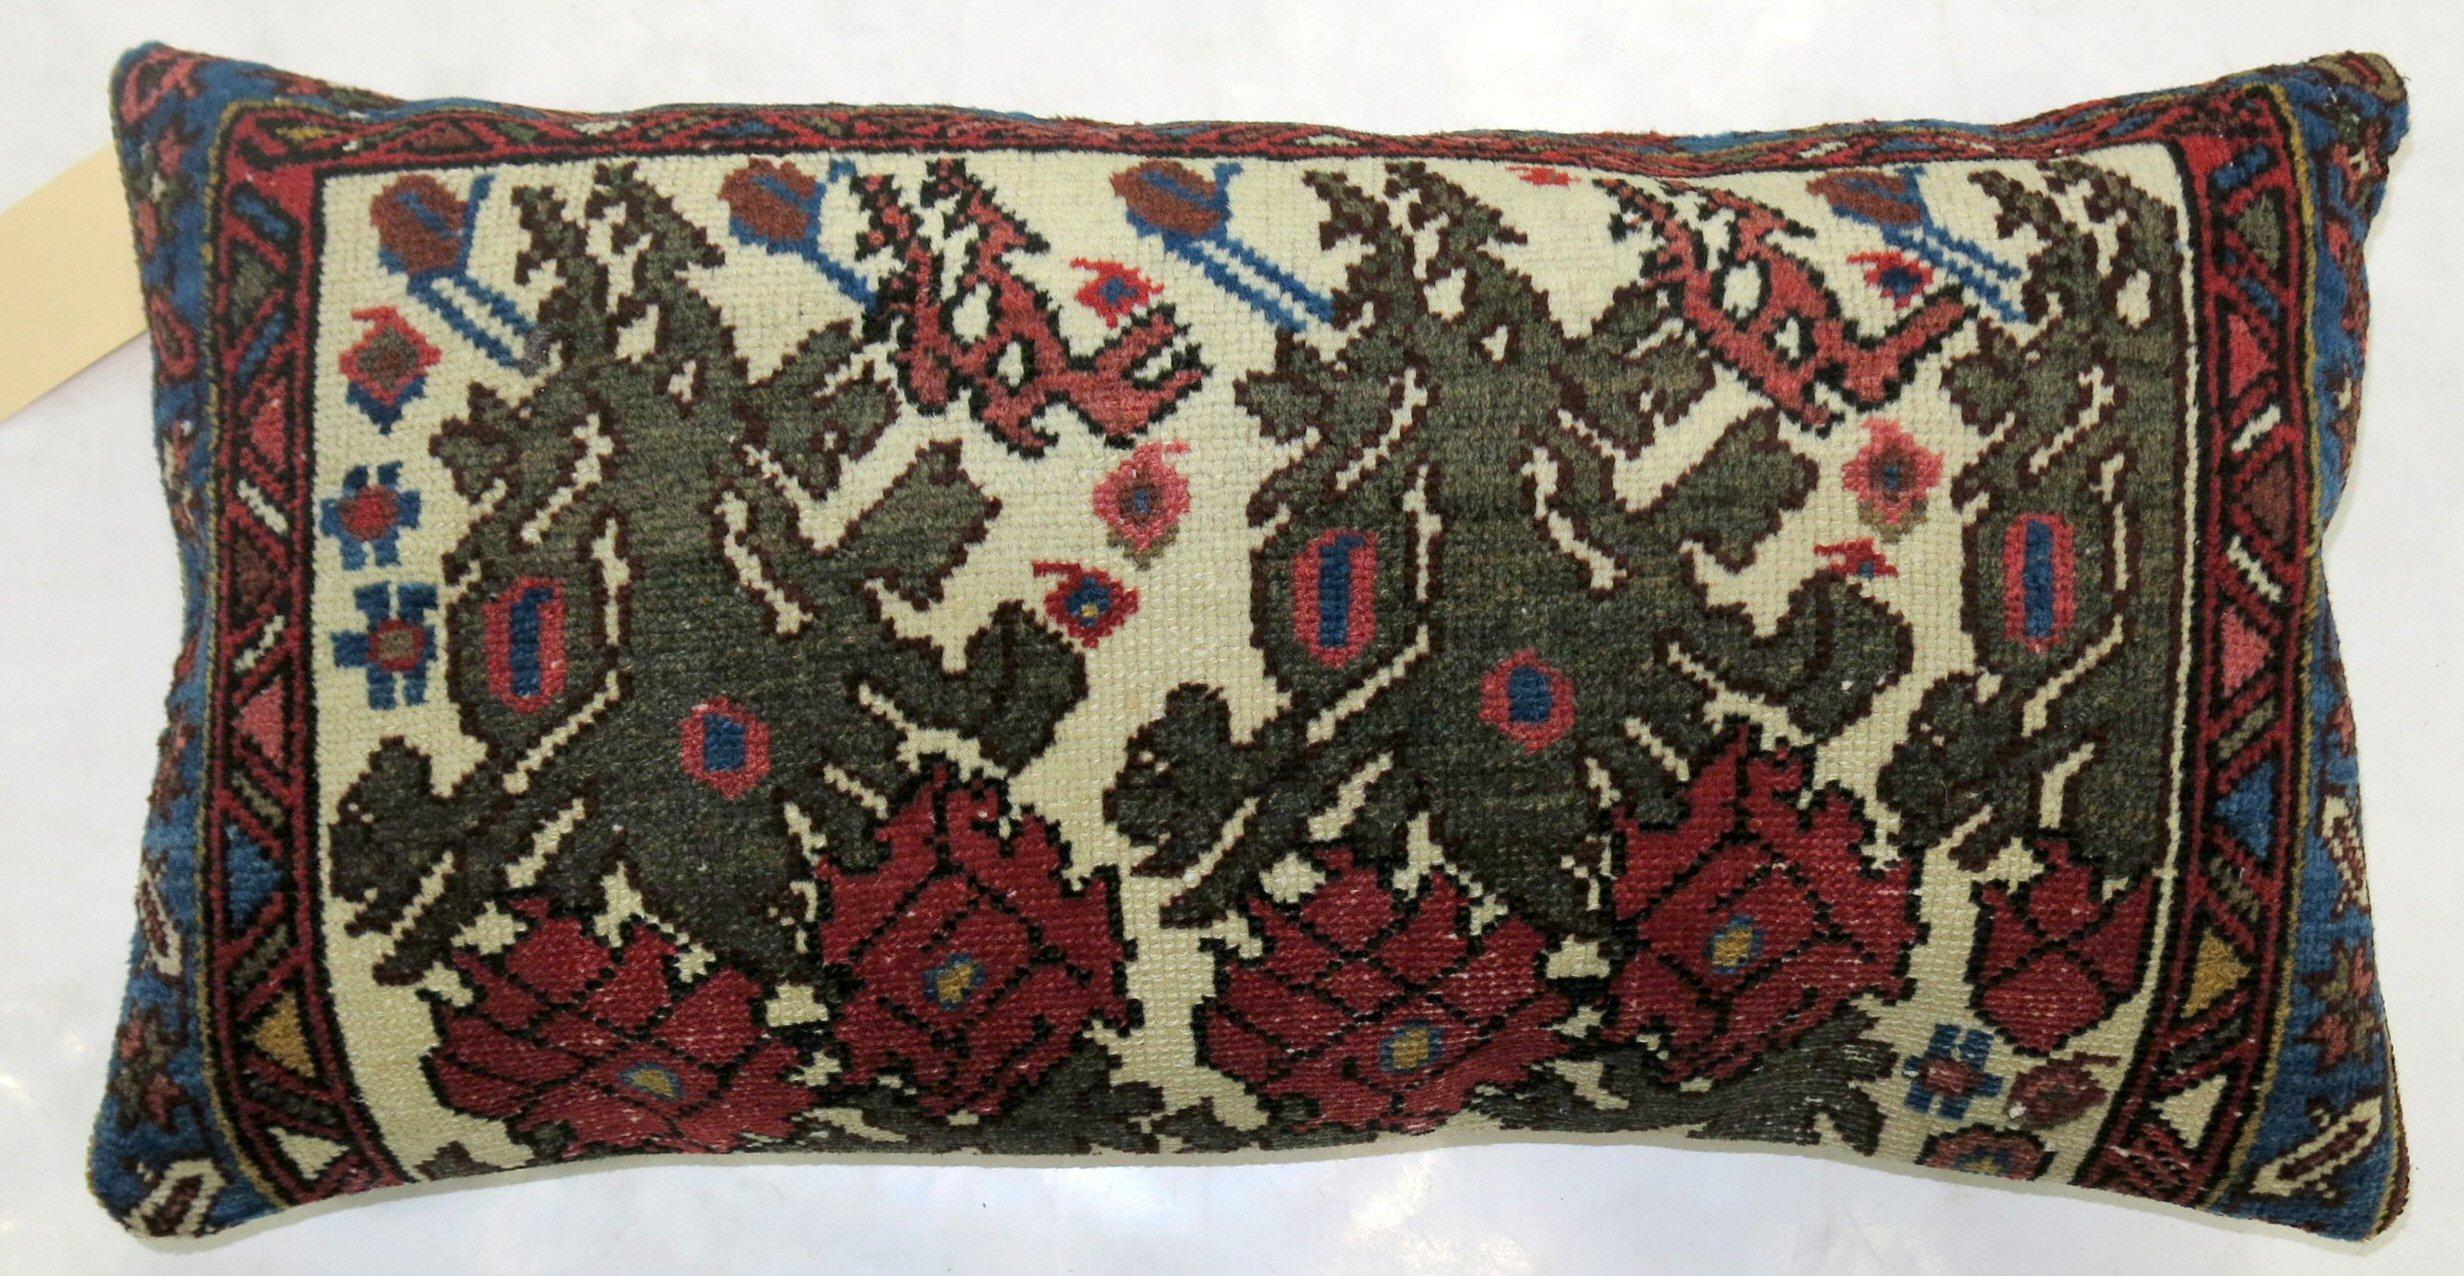  Zabihi Collection Persian Floral Antique Rug Bolster Pillow In Good Condition For Sale In New York, NY